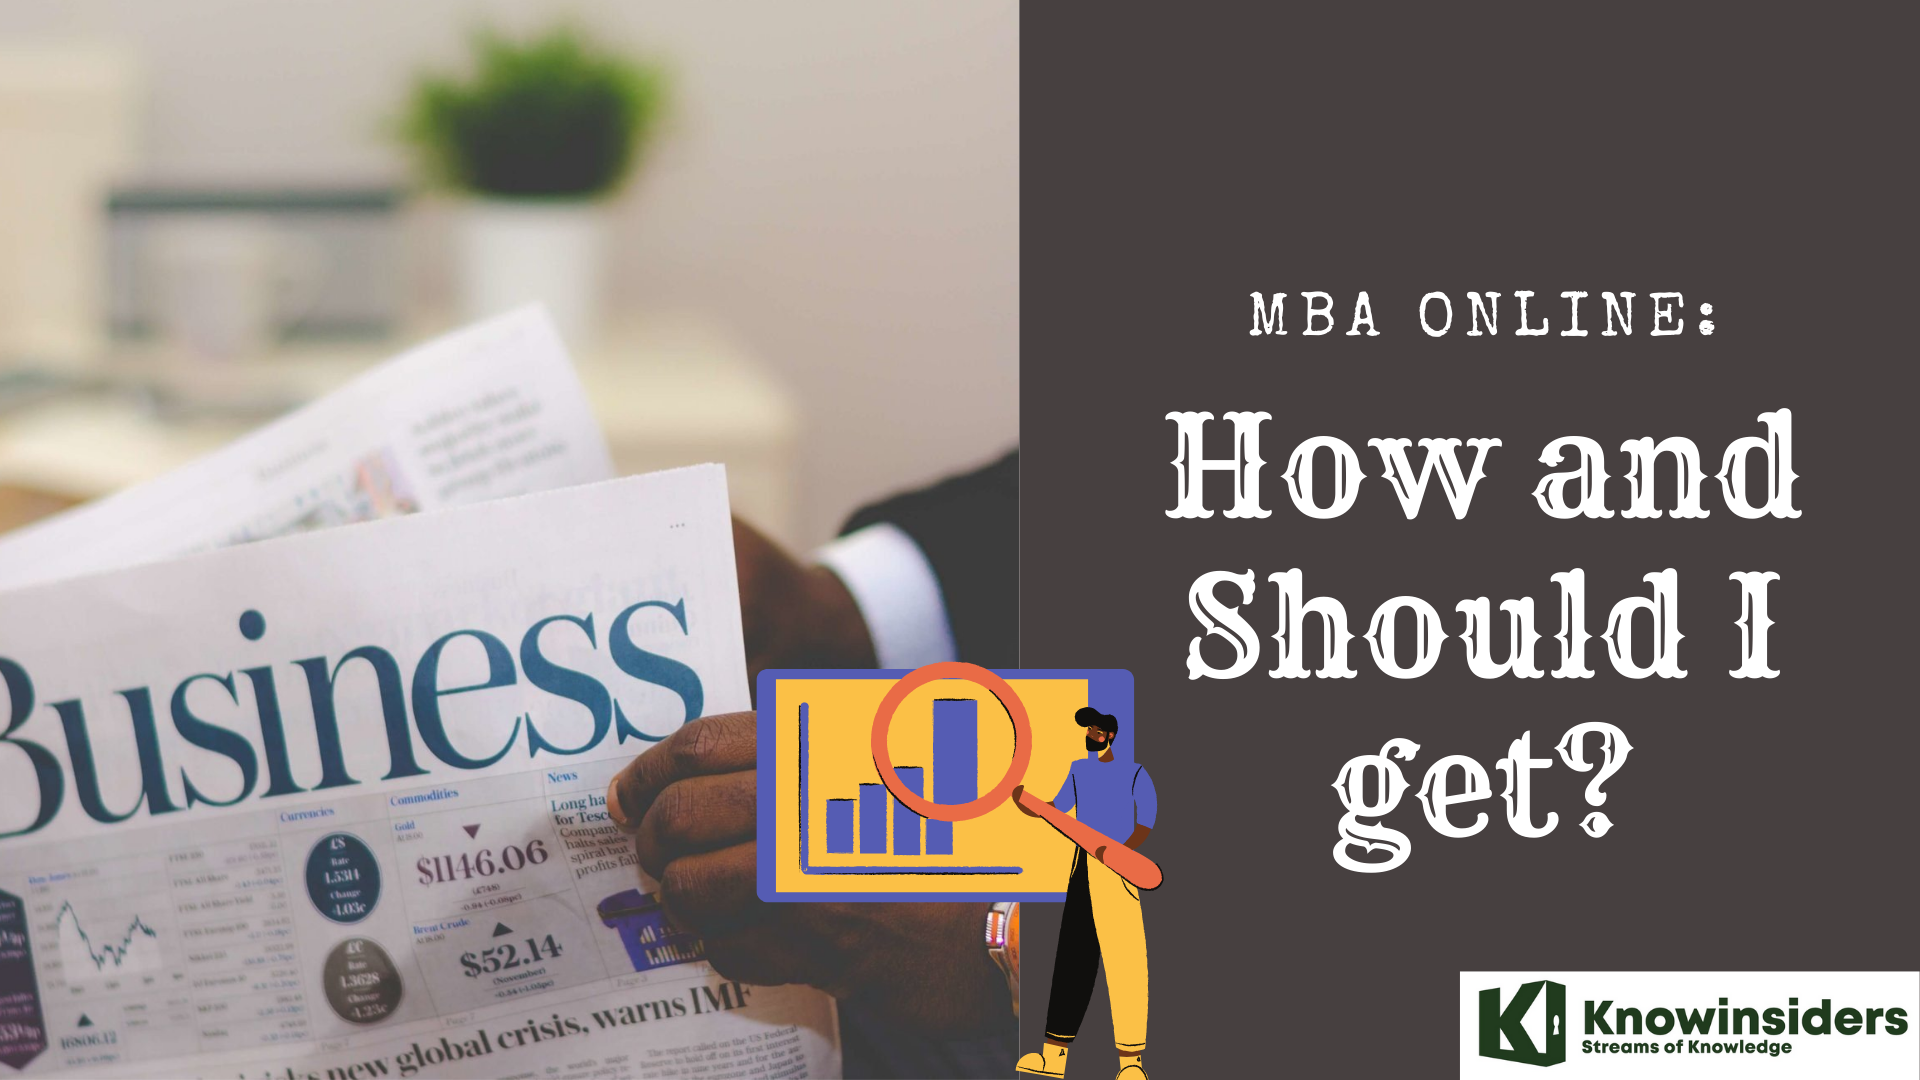 How To Get MBA Online?